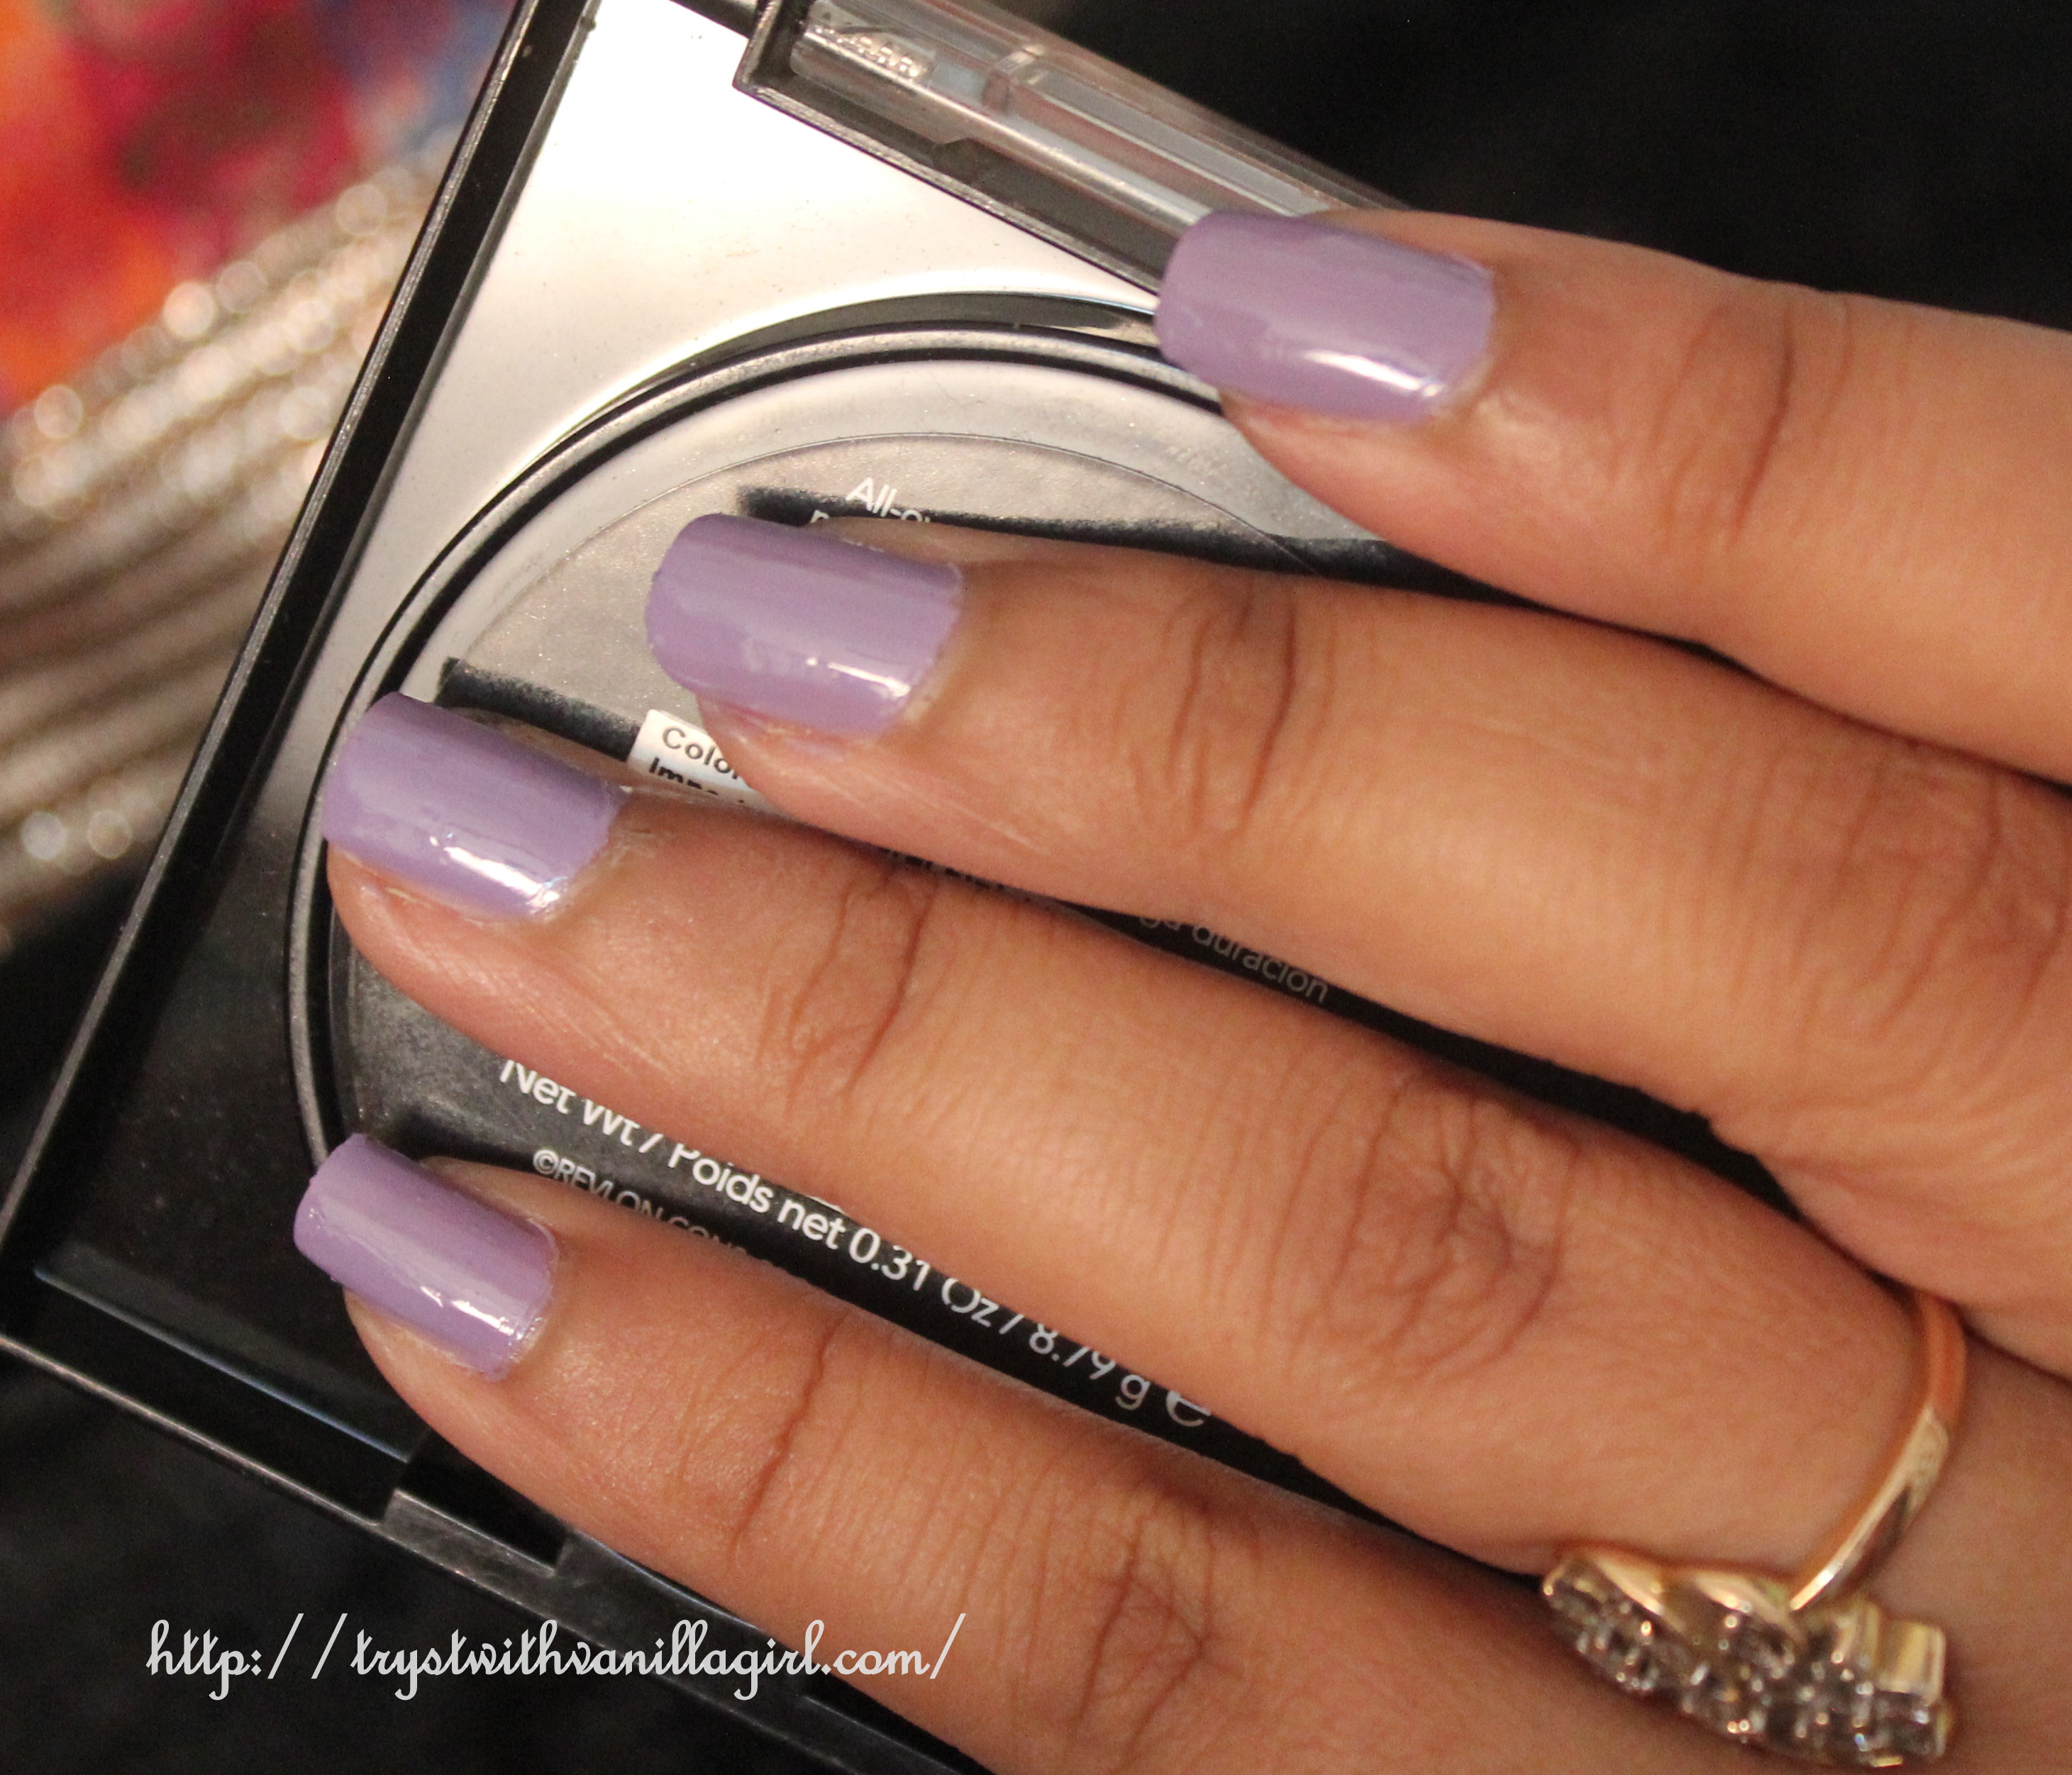 Maybelline Color Show Nail Polish Blackcurrant Pop Review,NOTD